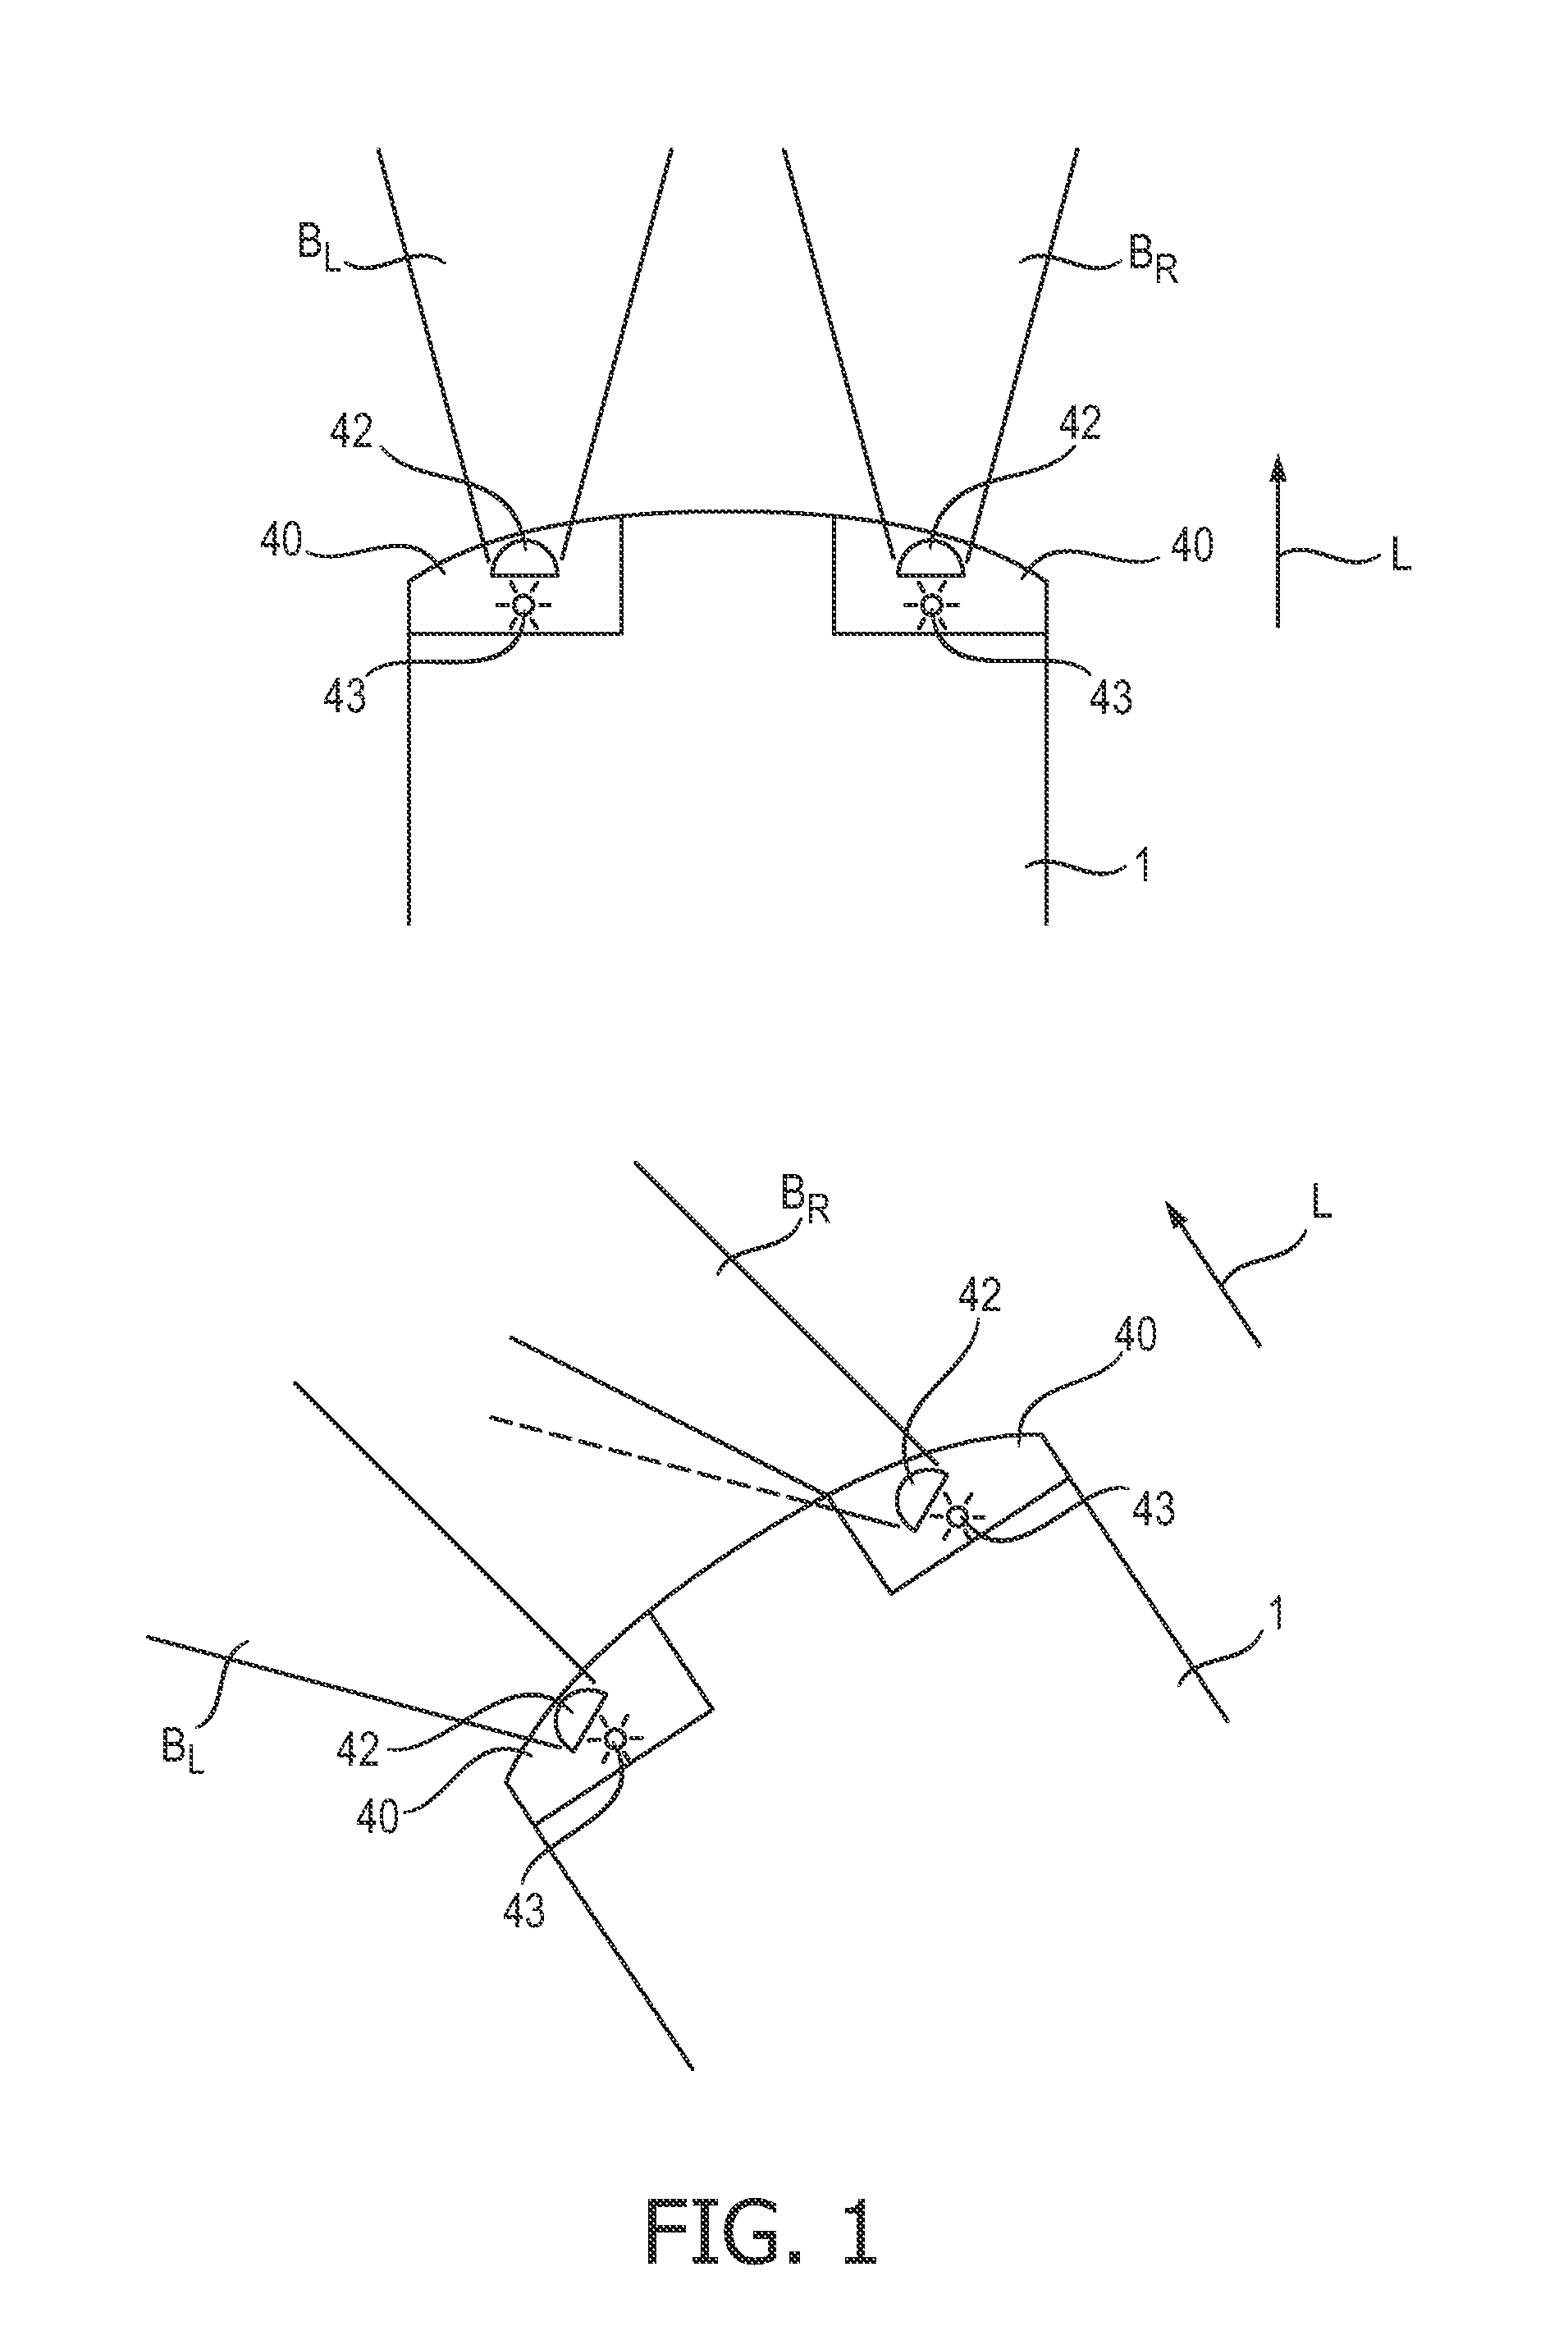 Lighting assembly for vehicle